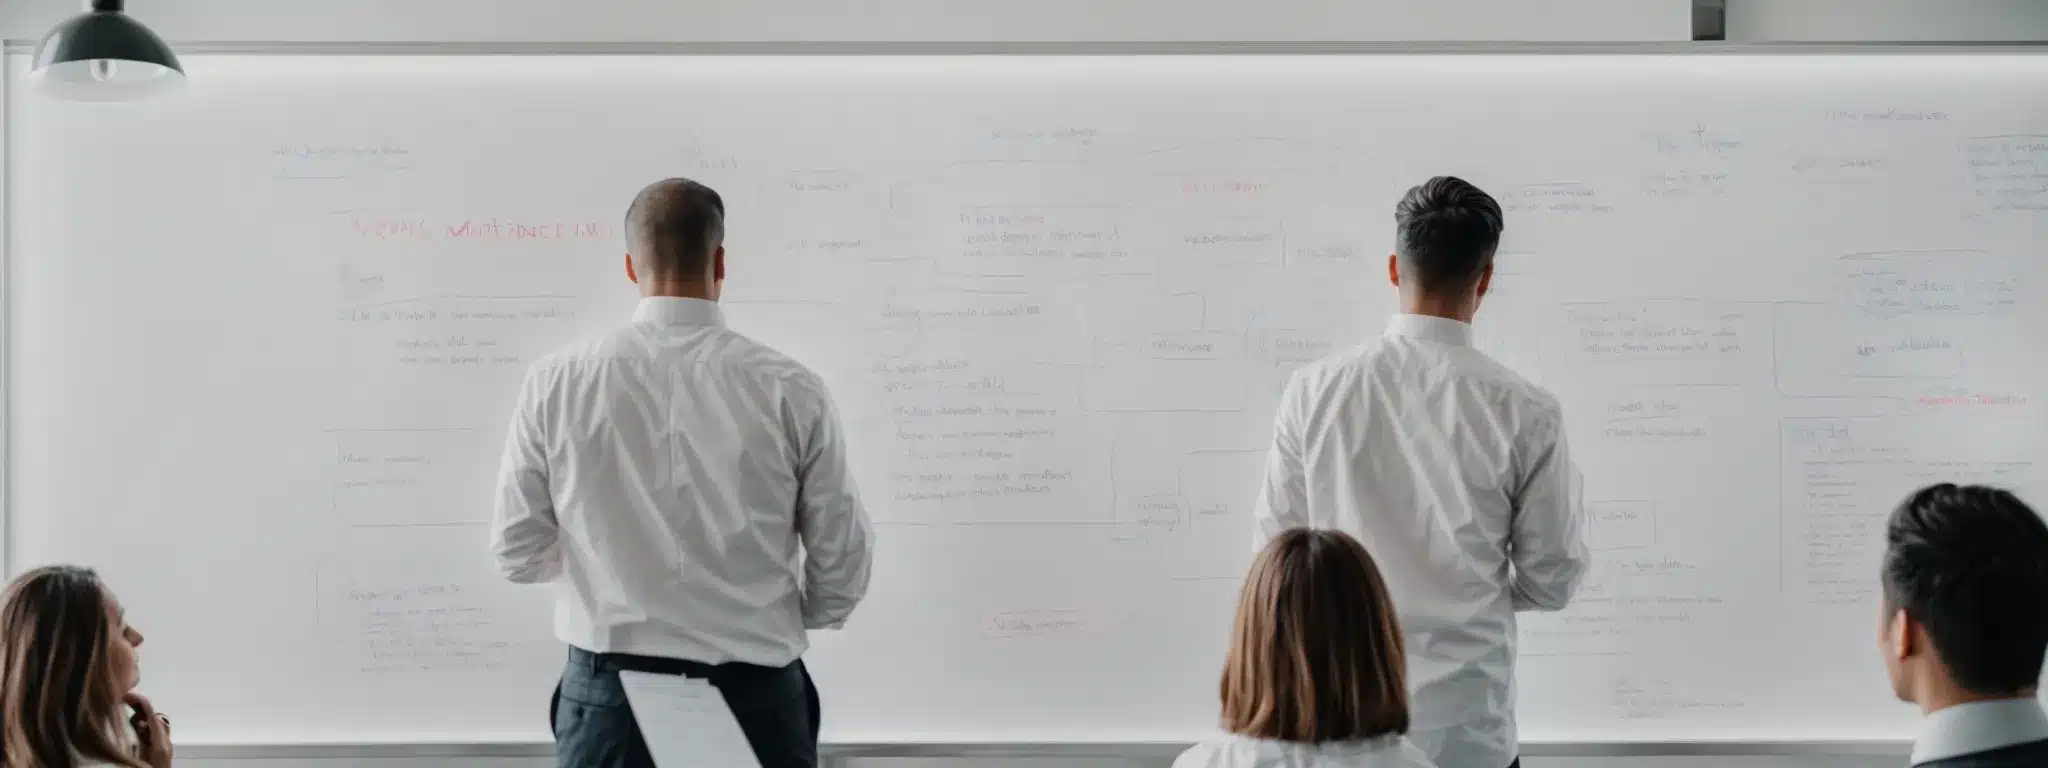 A Marketer Outlines Core Brand Concepts On A Clear Whiteboard, Reflecting A Strategic Planning Session Focused On Defining A Compelling Customer Value Proposition.